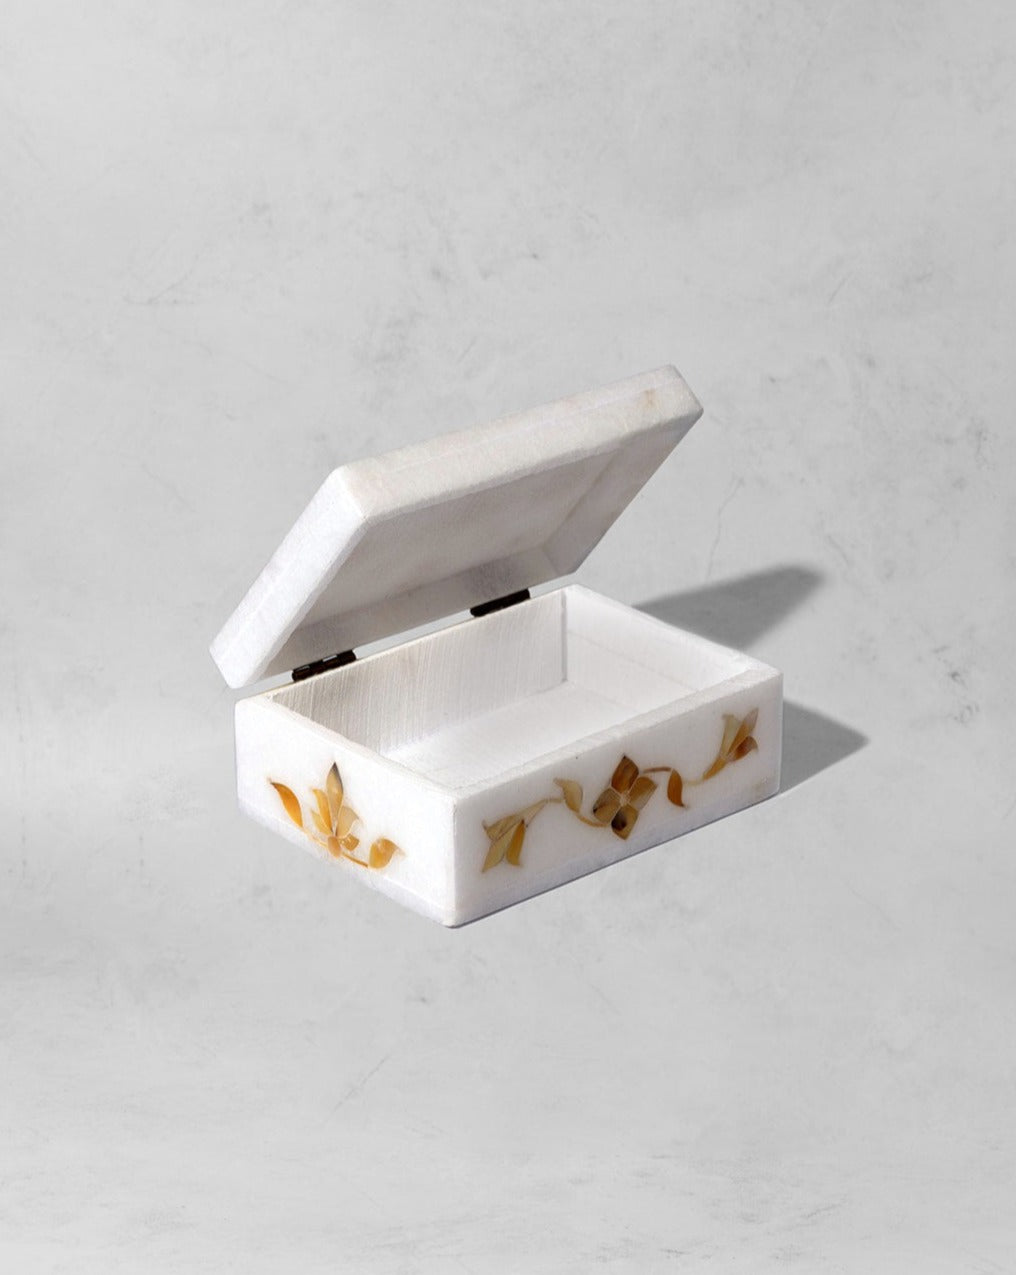 Shop Jewelry Boxes